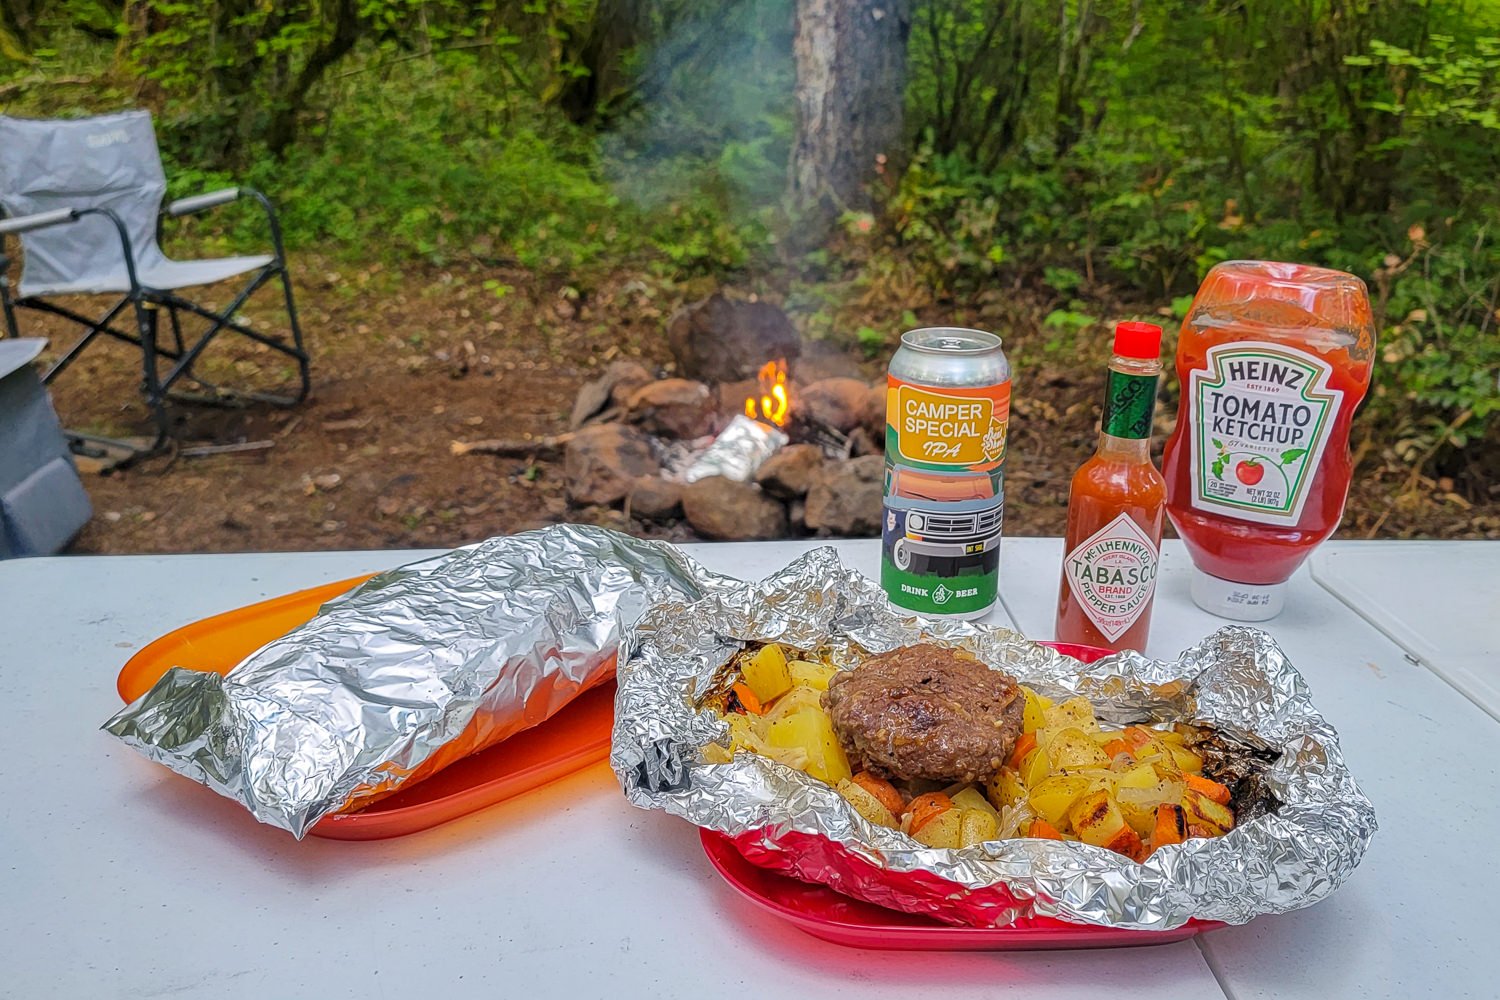 Classic foil packet meal with beer, hot sauce, and ketchup